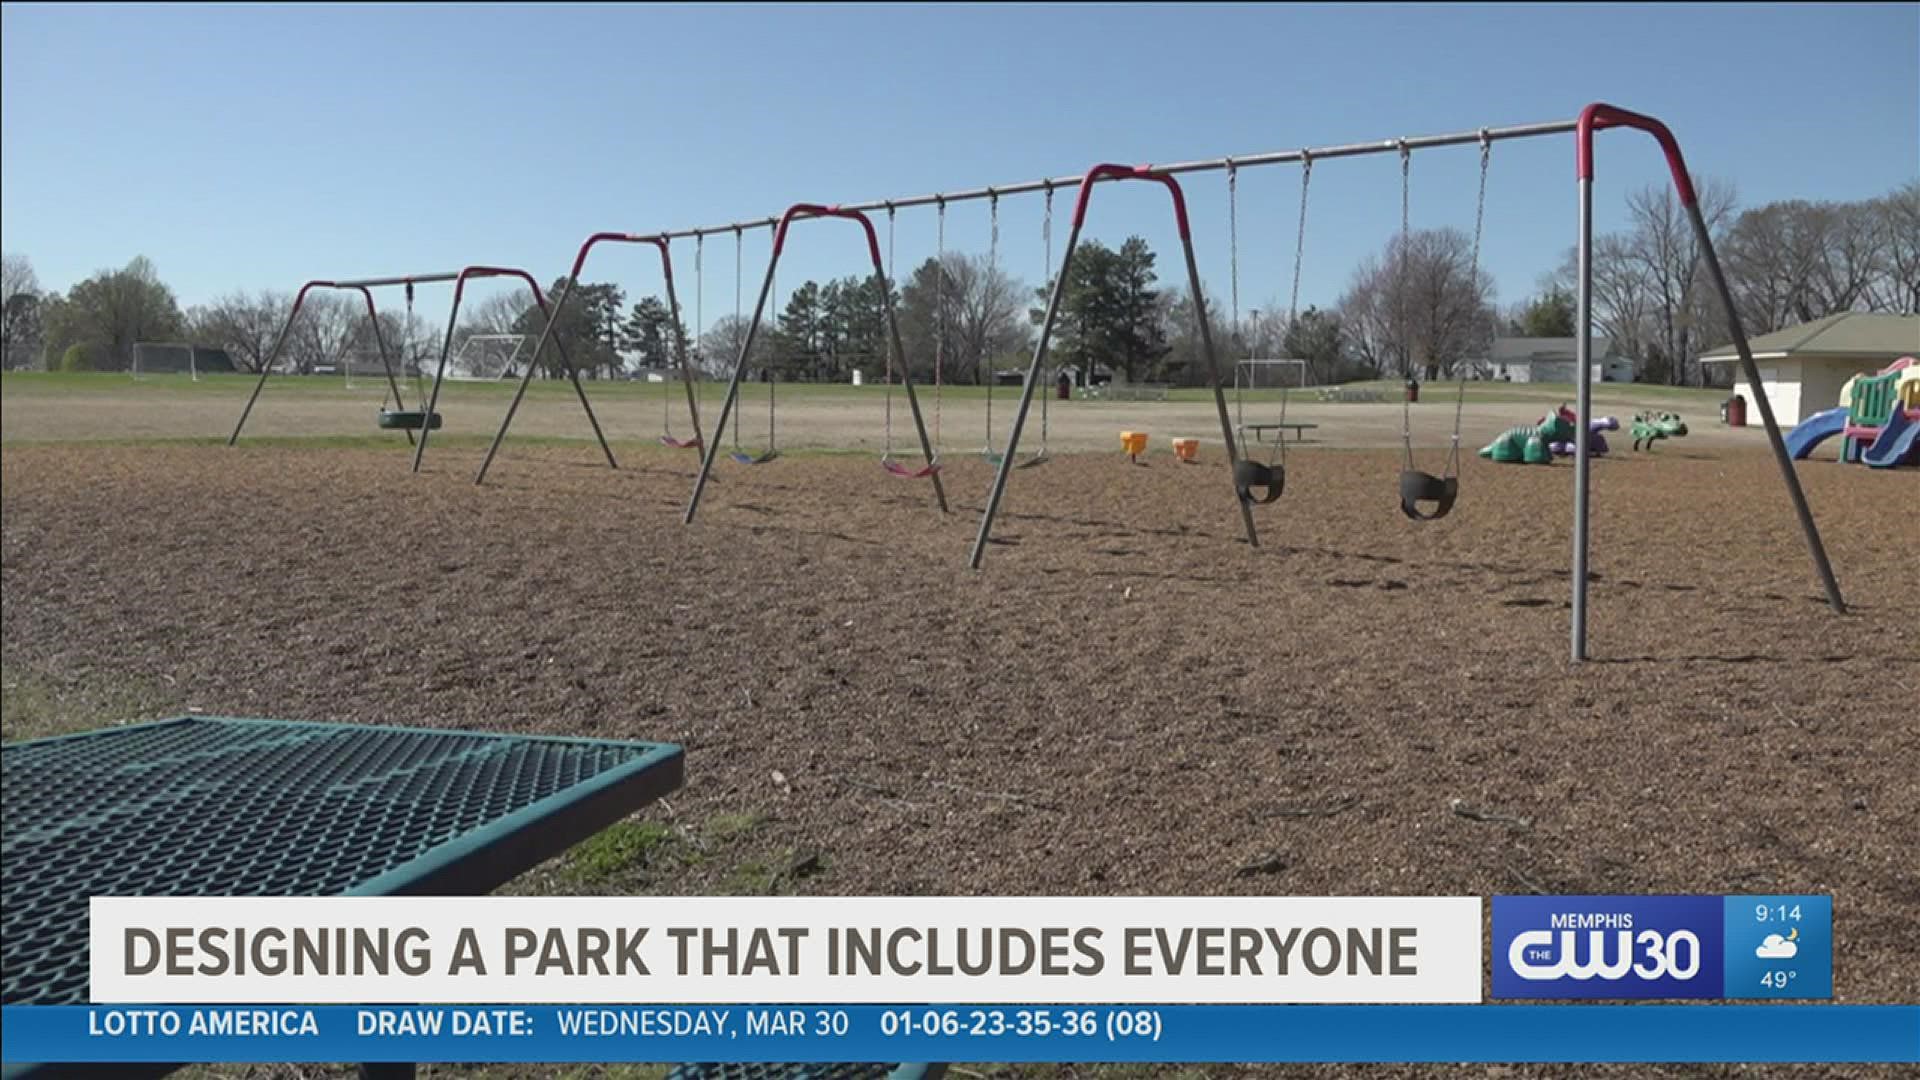 Arimus Sanders is working on rebuilding the playground at Valentine Park in Munford so that it is designed for people with disabilities.